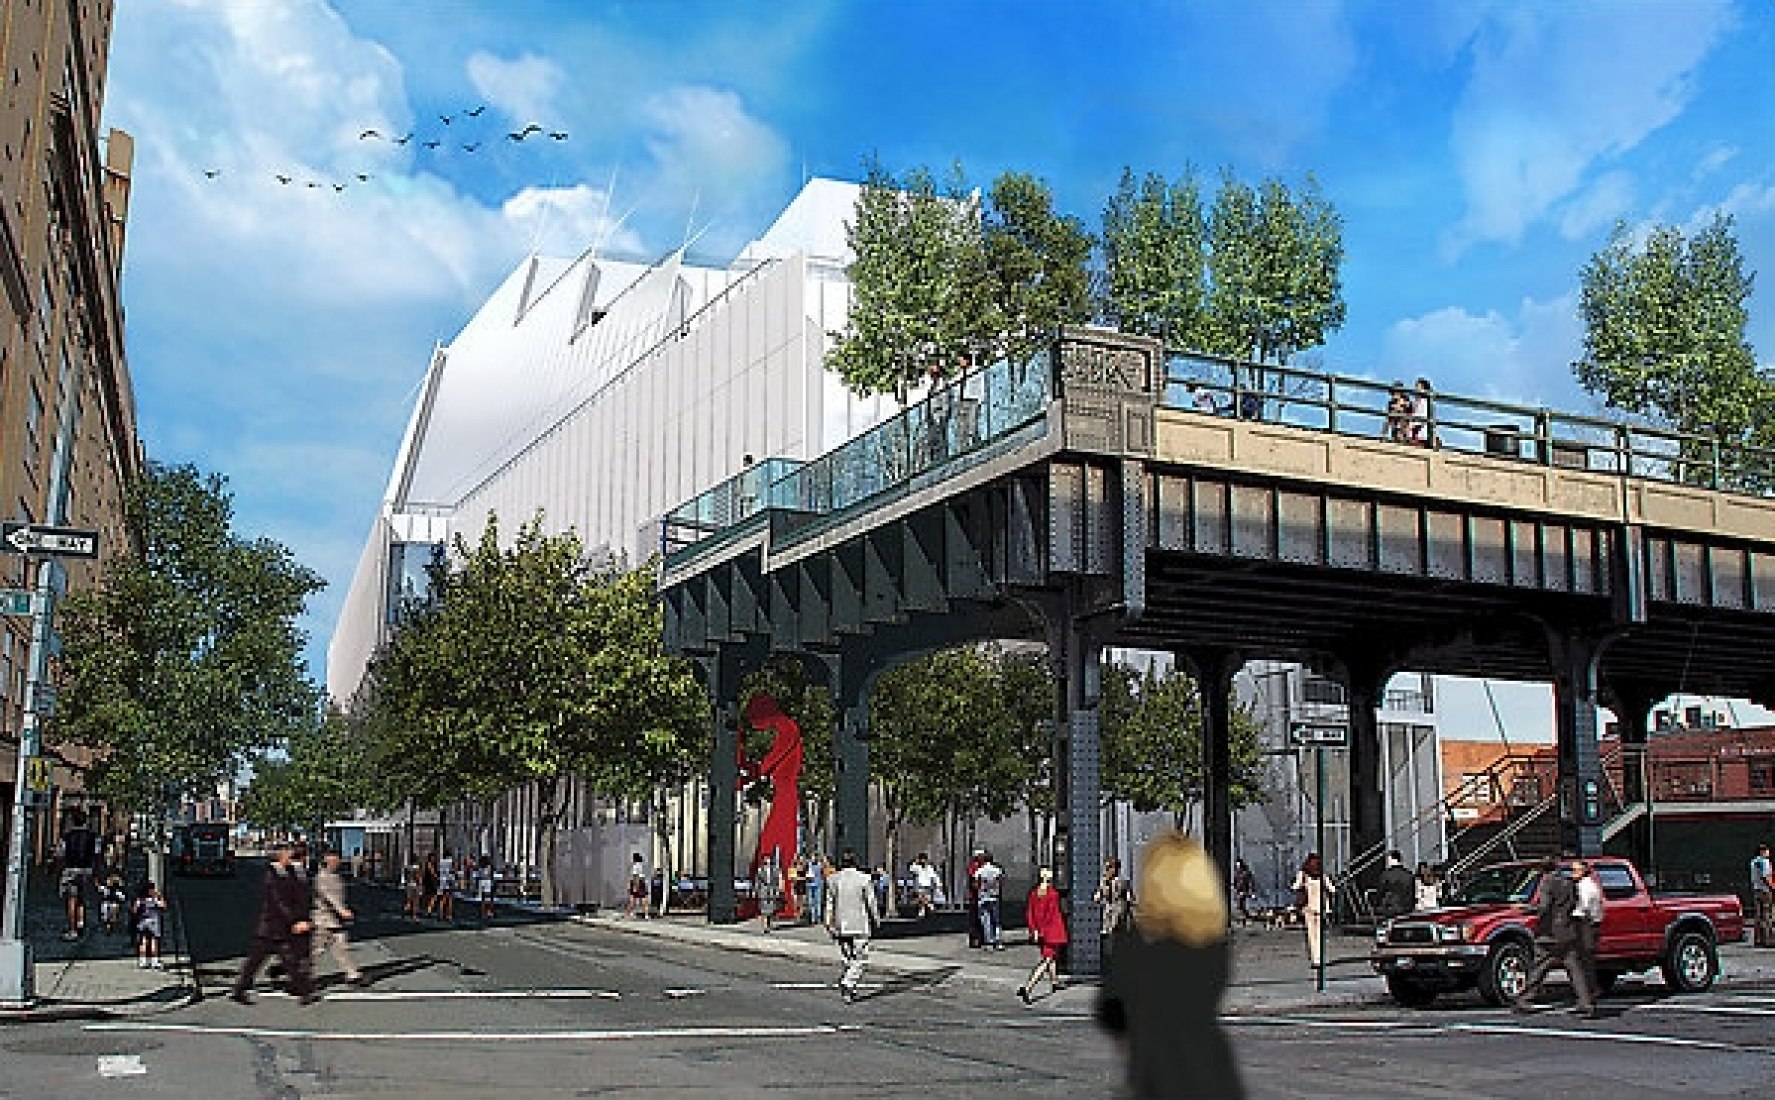 A rendering of the proposed new branch of the Whitney Museum of American Art in the meatpacking district, designed by Renzo Piano, showing the High Line in the foreground.